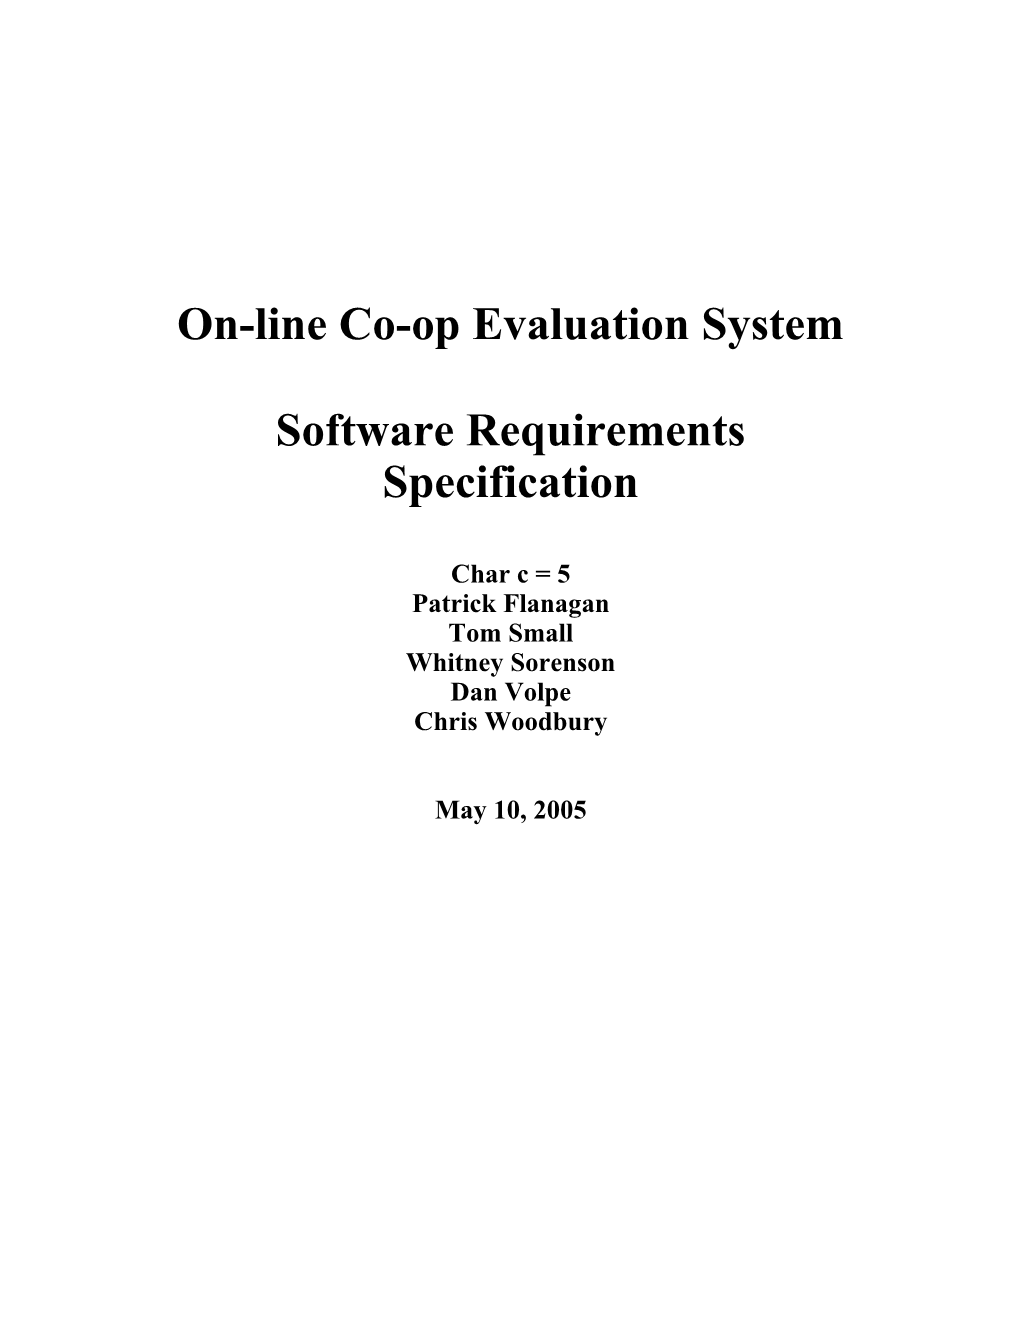 Requirements Document Student Co-Op Evaluation Systemversion 1.3